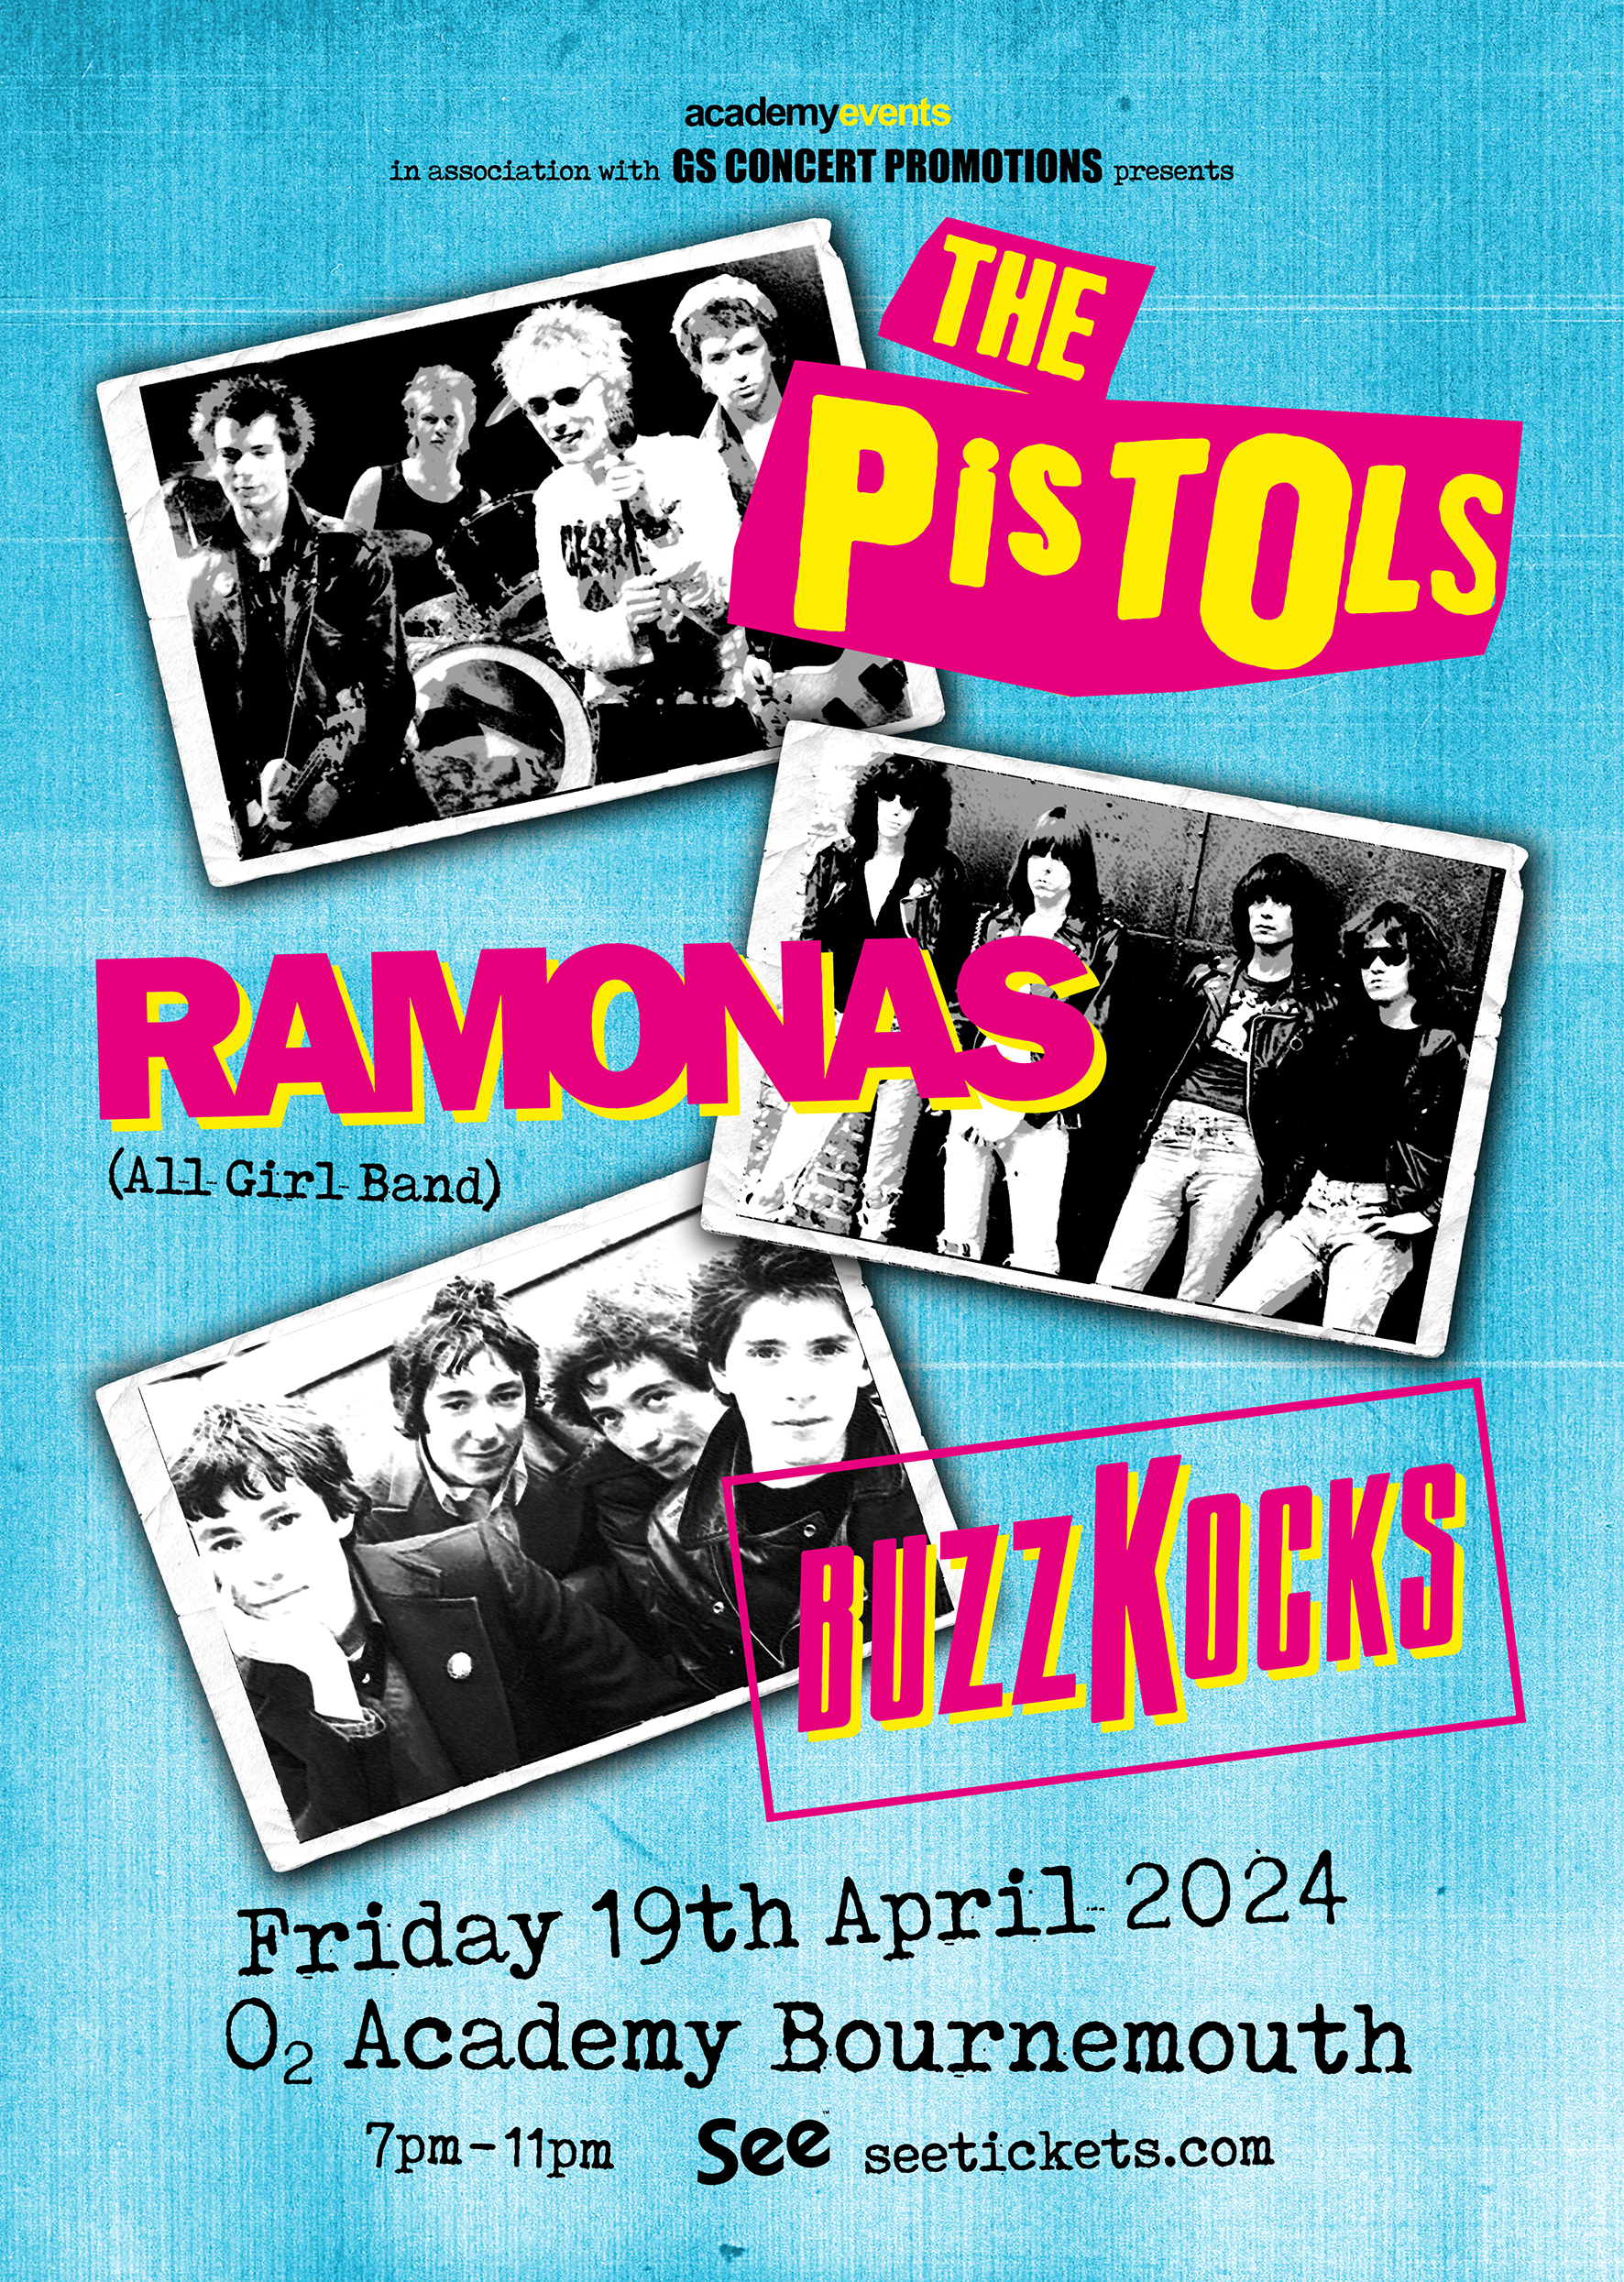 The Pistols live at O2 Academy